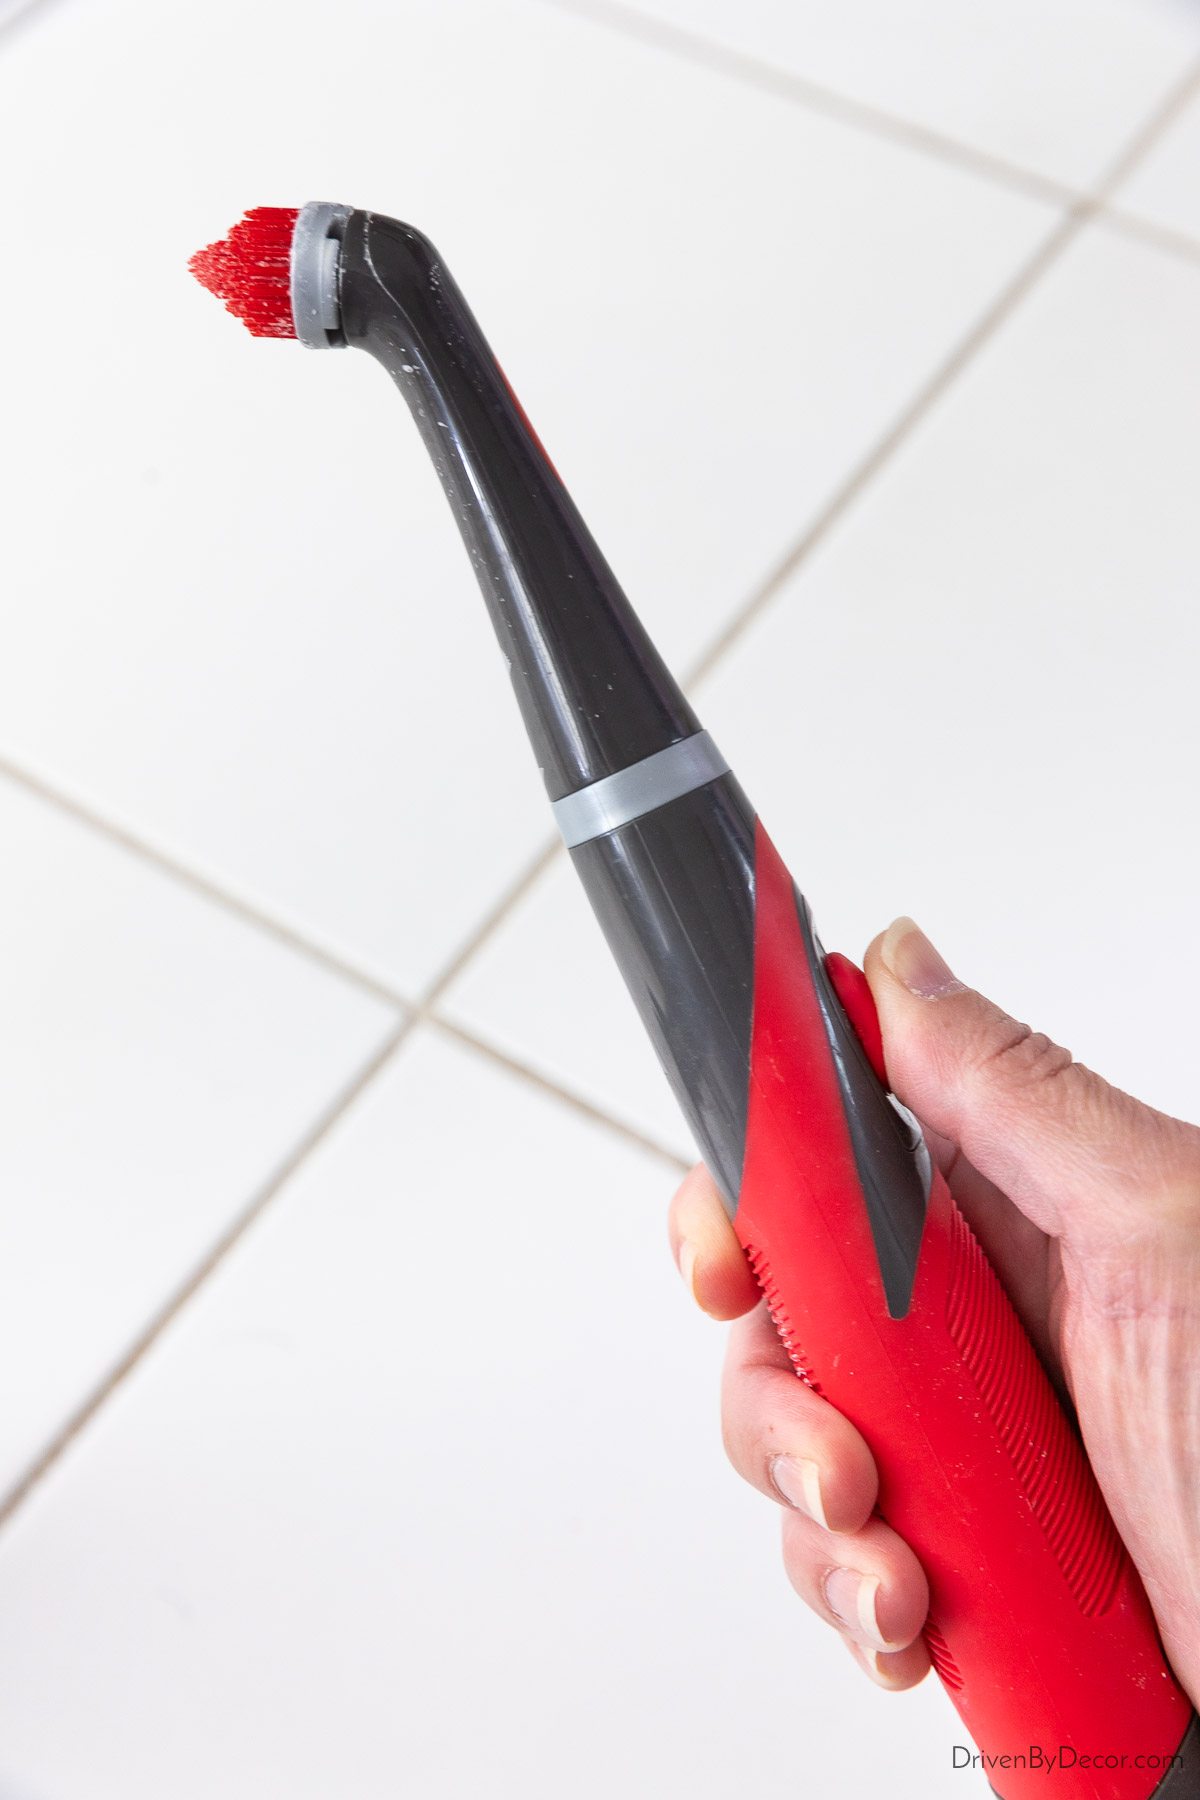 https://www.drivenbydecor.com/wp-content/uploads/2023/07/grout-cleaning-spin-brush.jpg